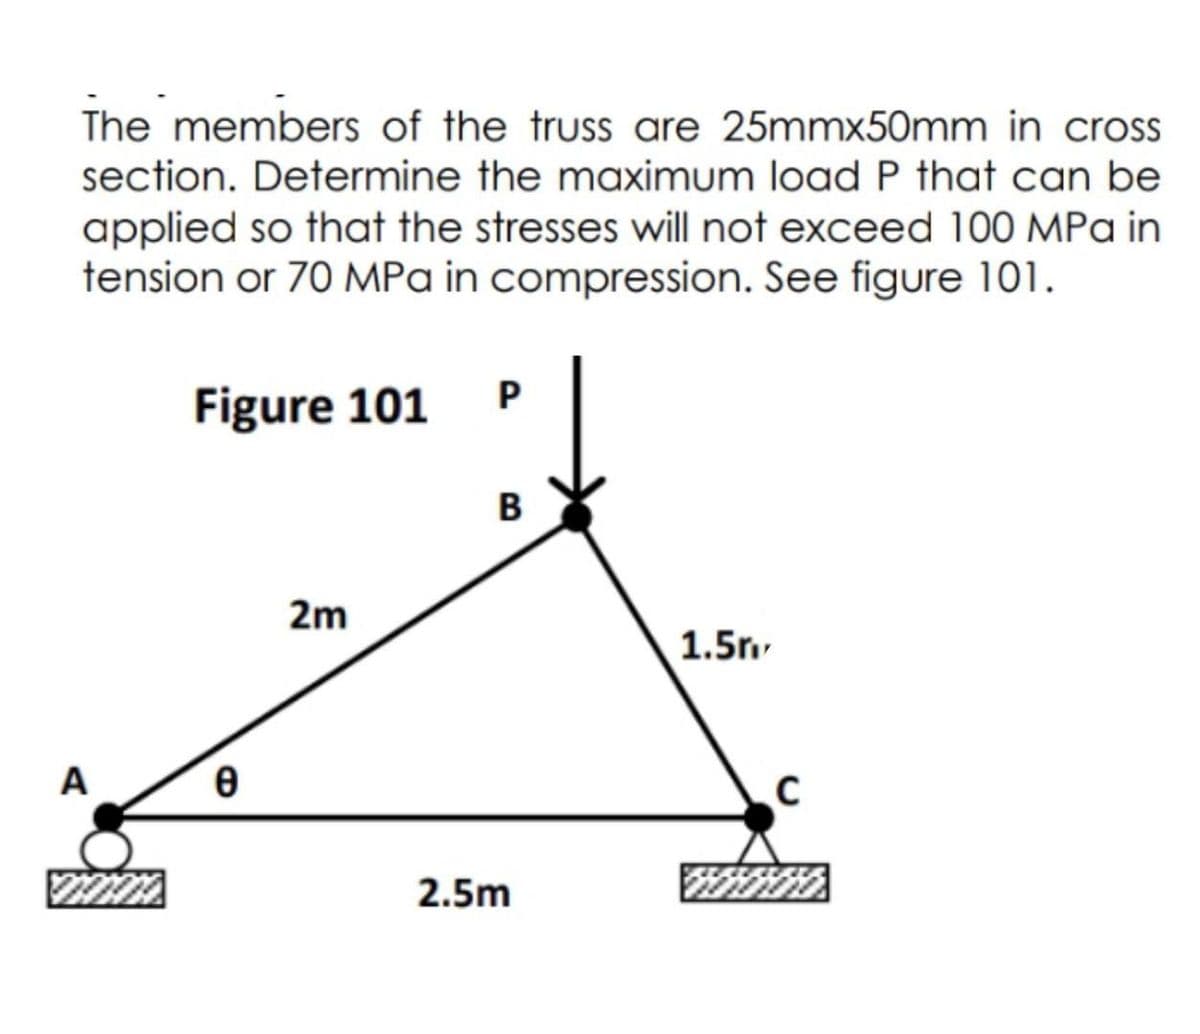 The members of the truss are 25mmx50mm in cross
section. Determine the maximum load P that can be
applied so that the stresses will not exceed 100 MPa in
tension or 70 MPa in compression. See figure 101.
Figure 101
A
0
2m
P
B
2.5m
1.5m
C